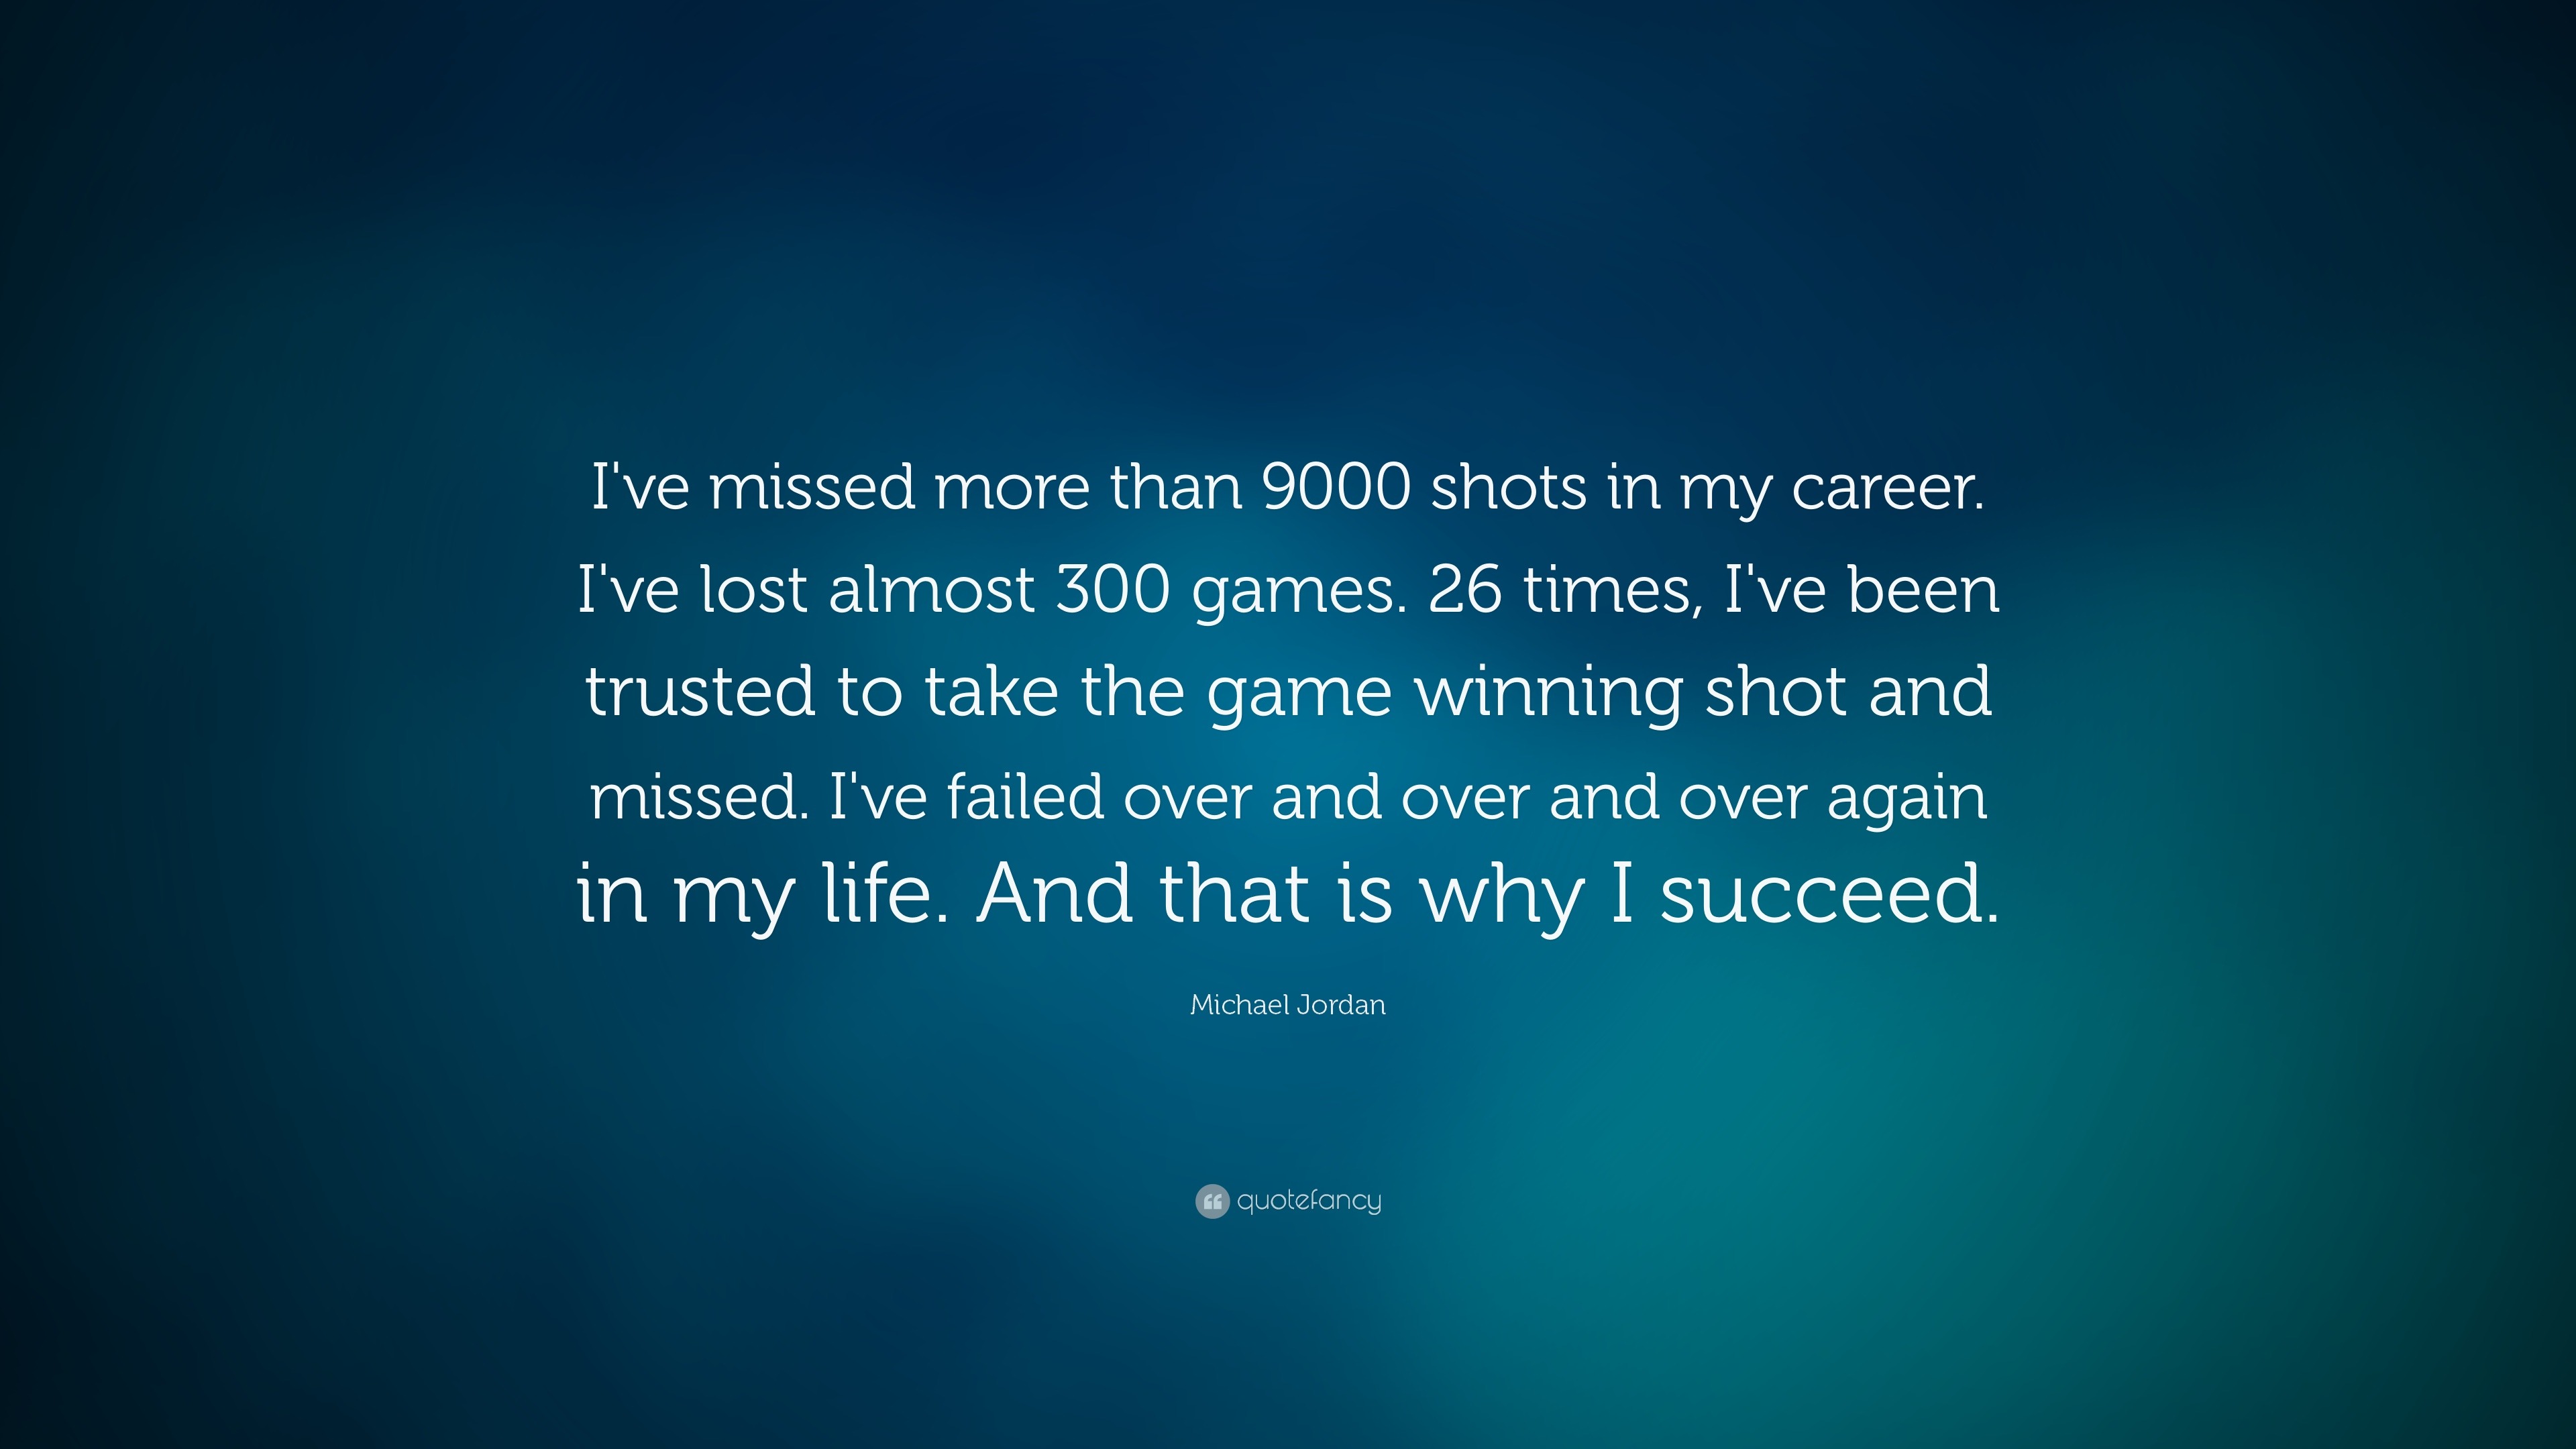 Michael Jordan Quote I Ve Missed More Than 9000 Shots In My Career I Ve Lost Almost 300 Games 26 Times I Ve Been Trusted To Take The Game Wallpapers Quotefancy